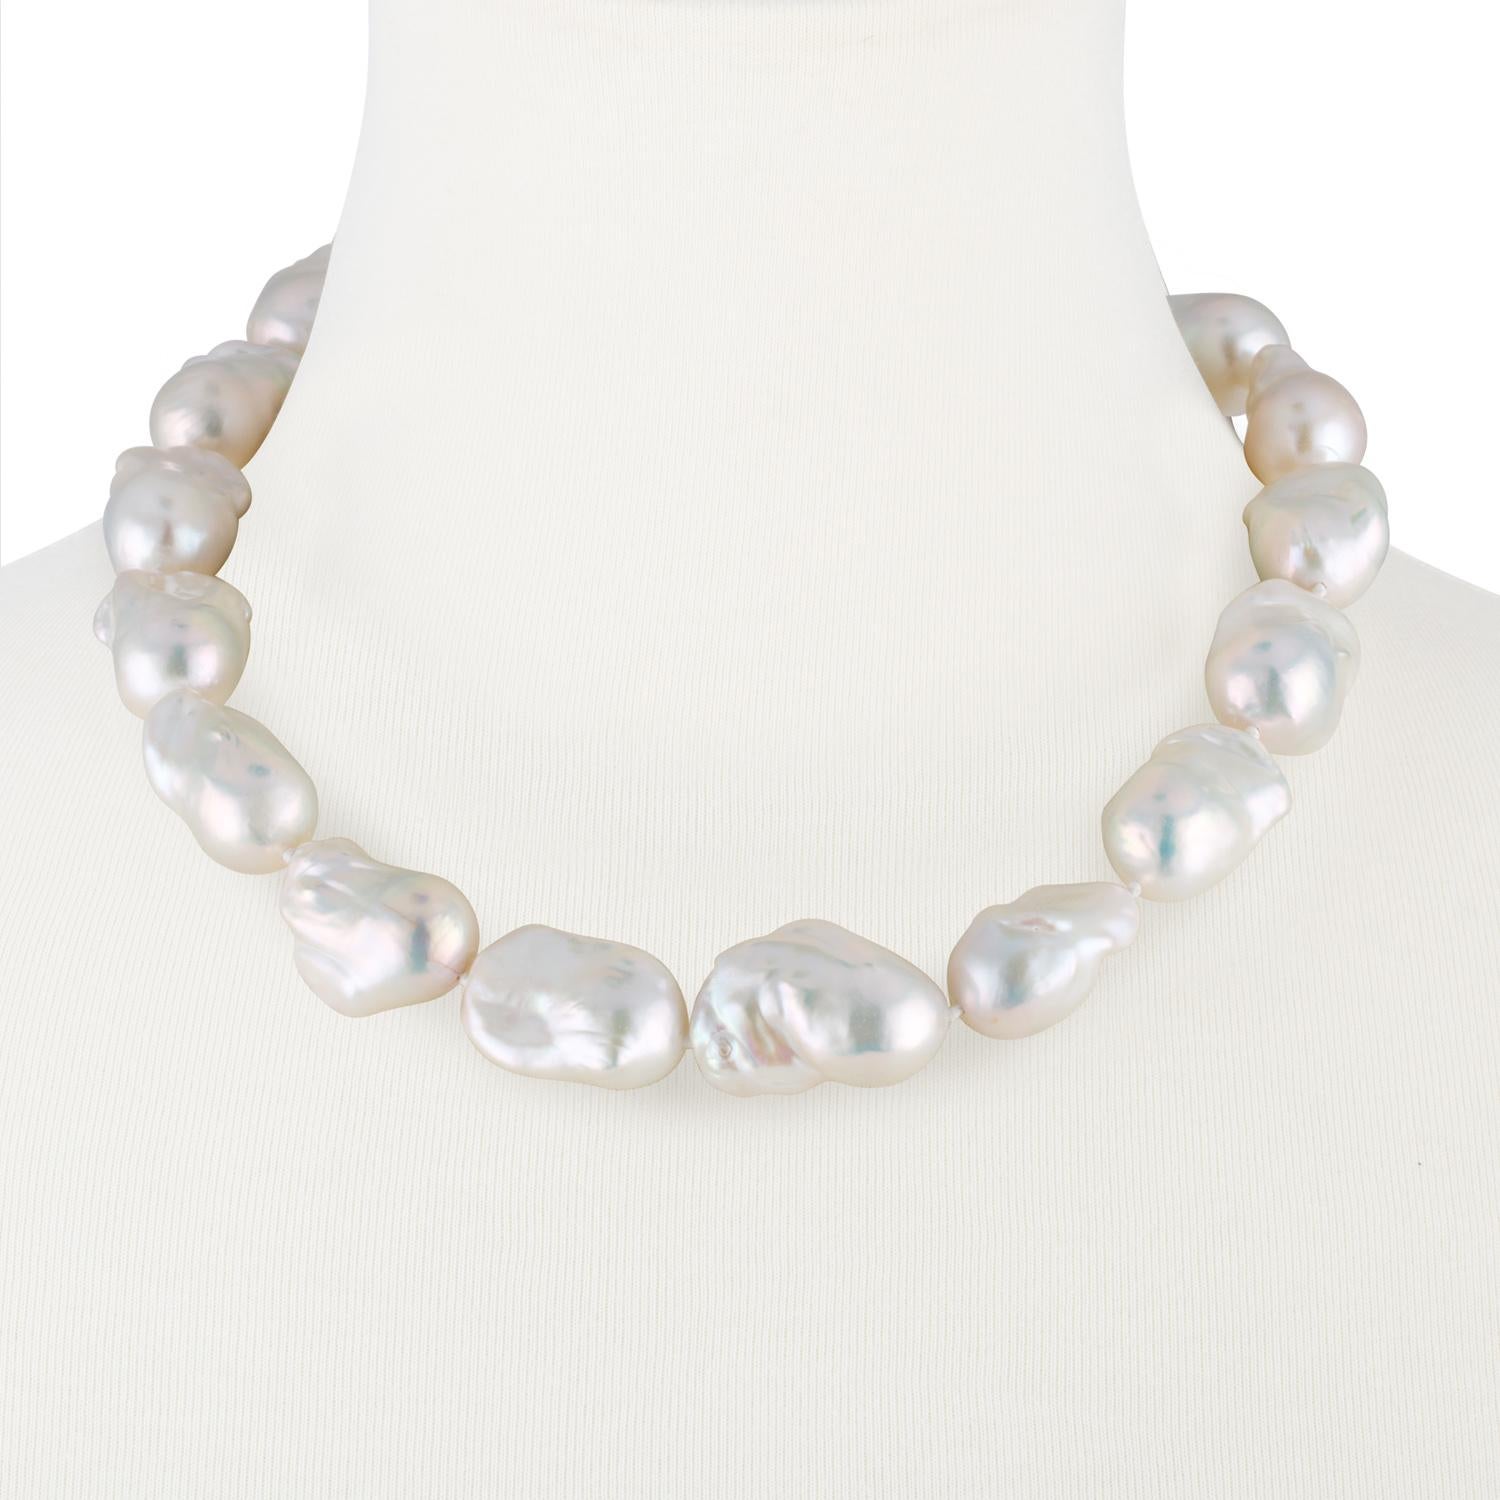 Uncut Freshwater Baroque White Cultured Pearl Necklace with 14 Karat Yellow Gold Clasp For Sale